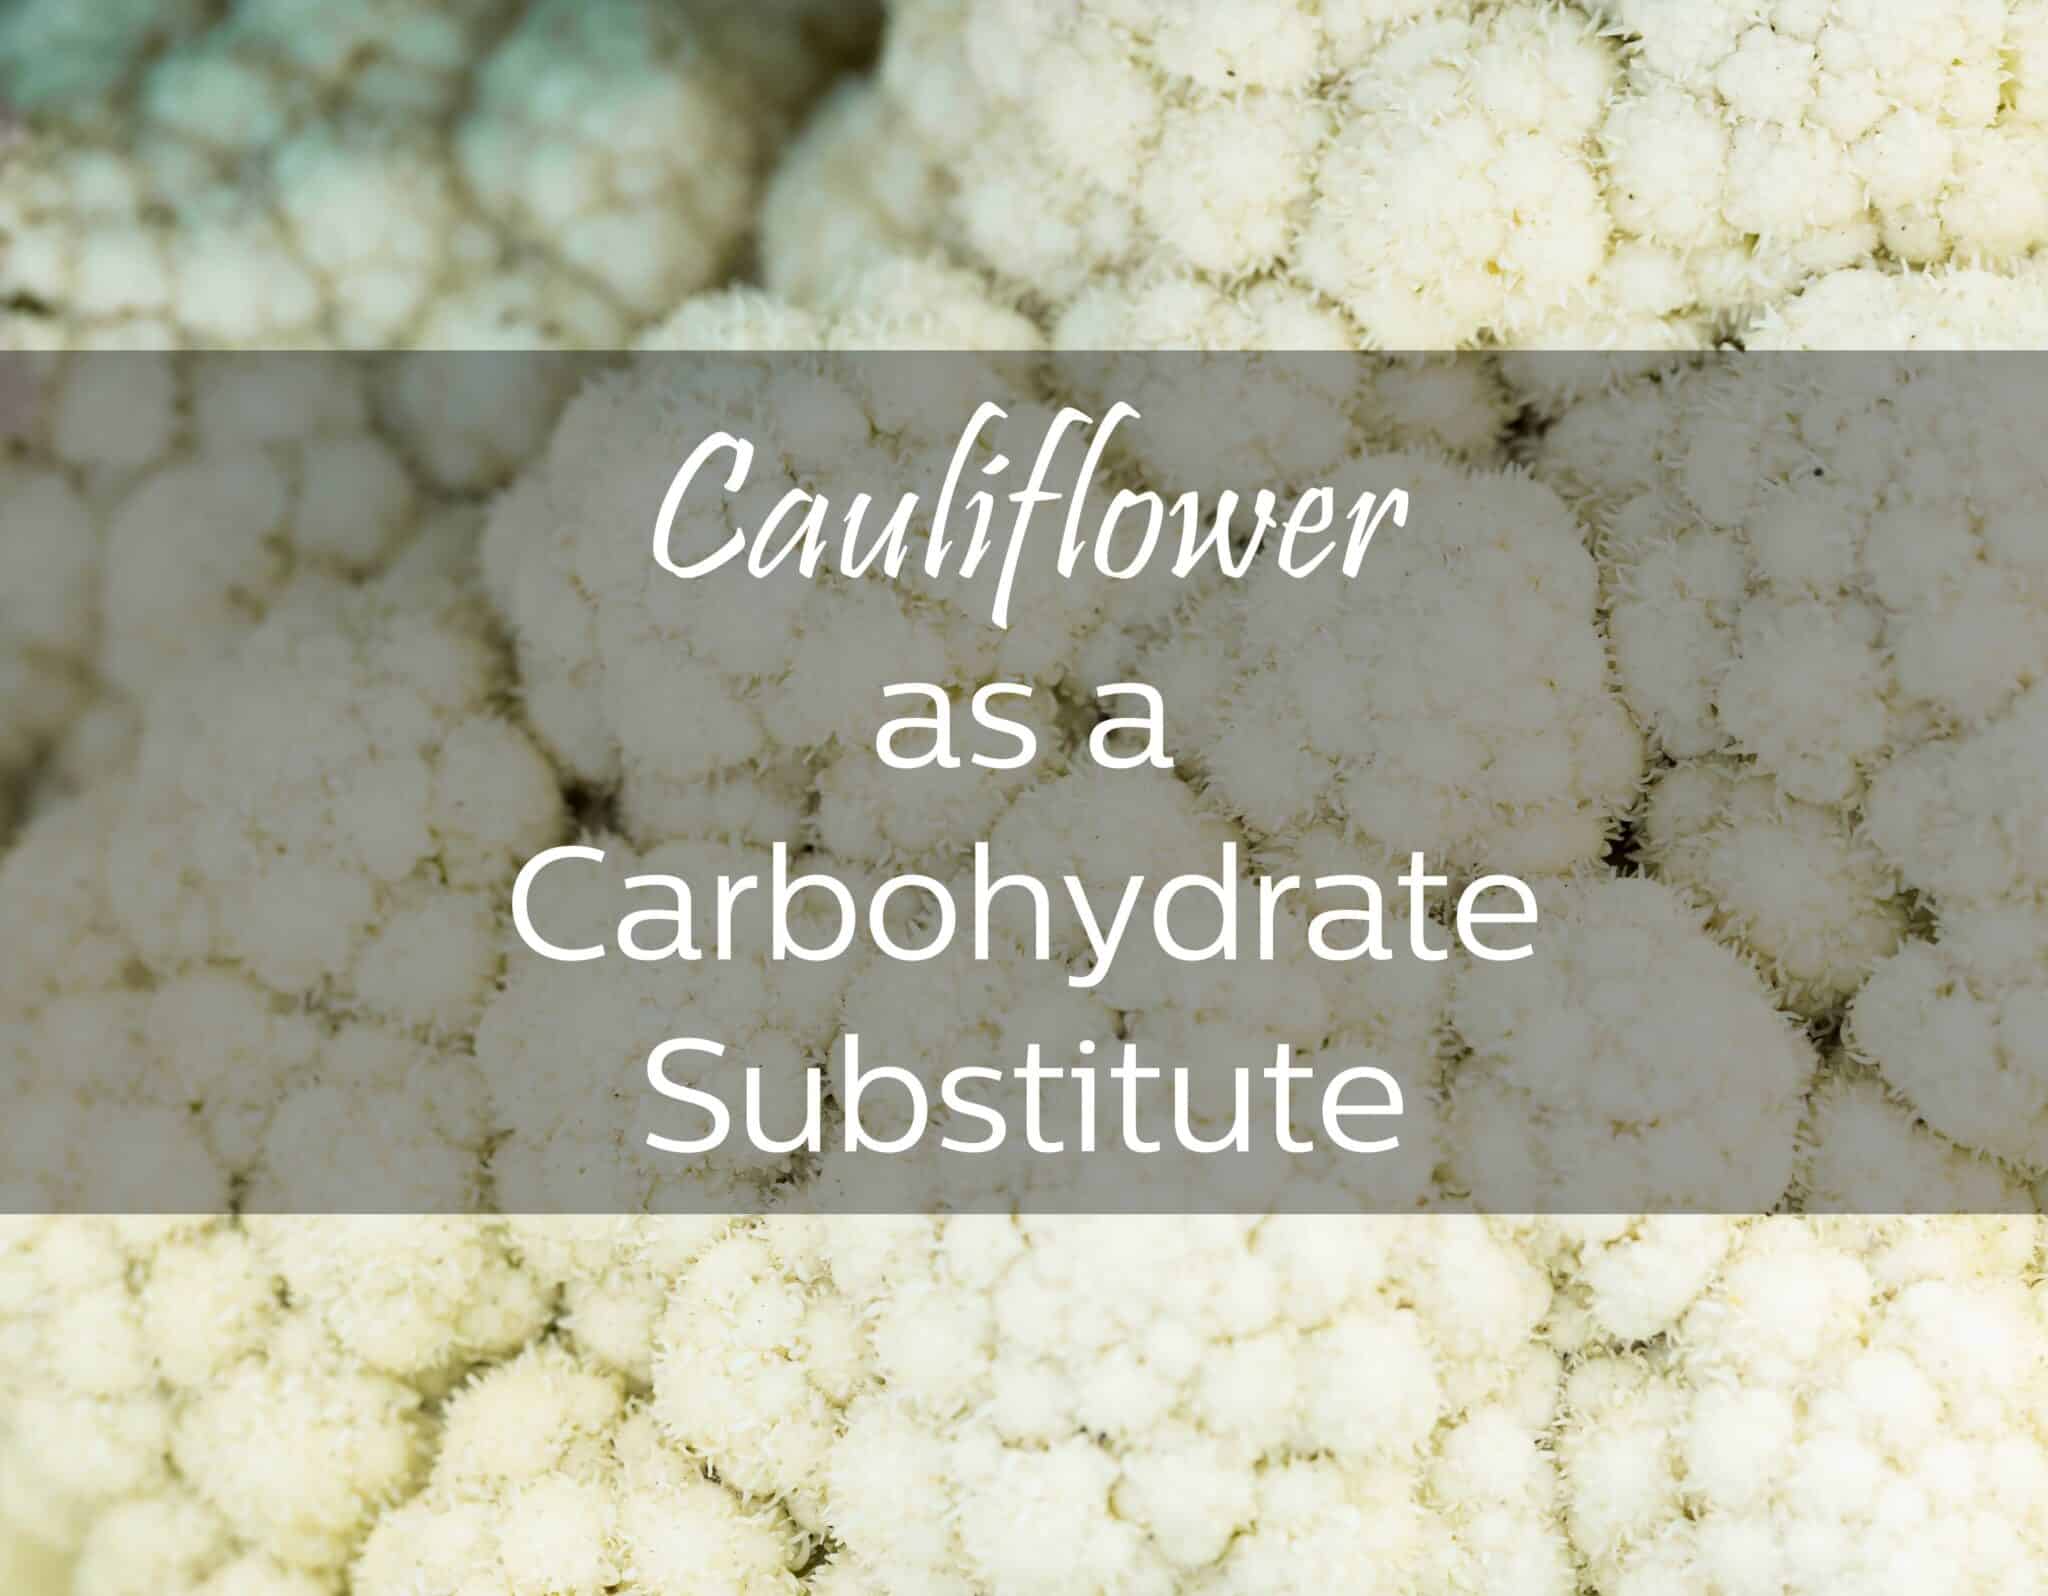 Cauliflower as a Carbohydrate Substitute